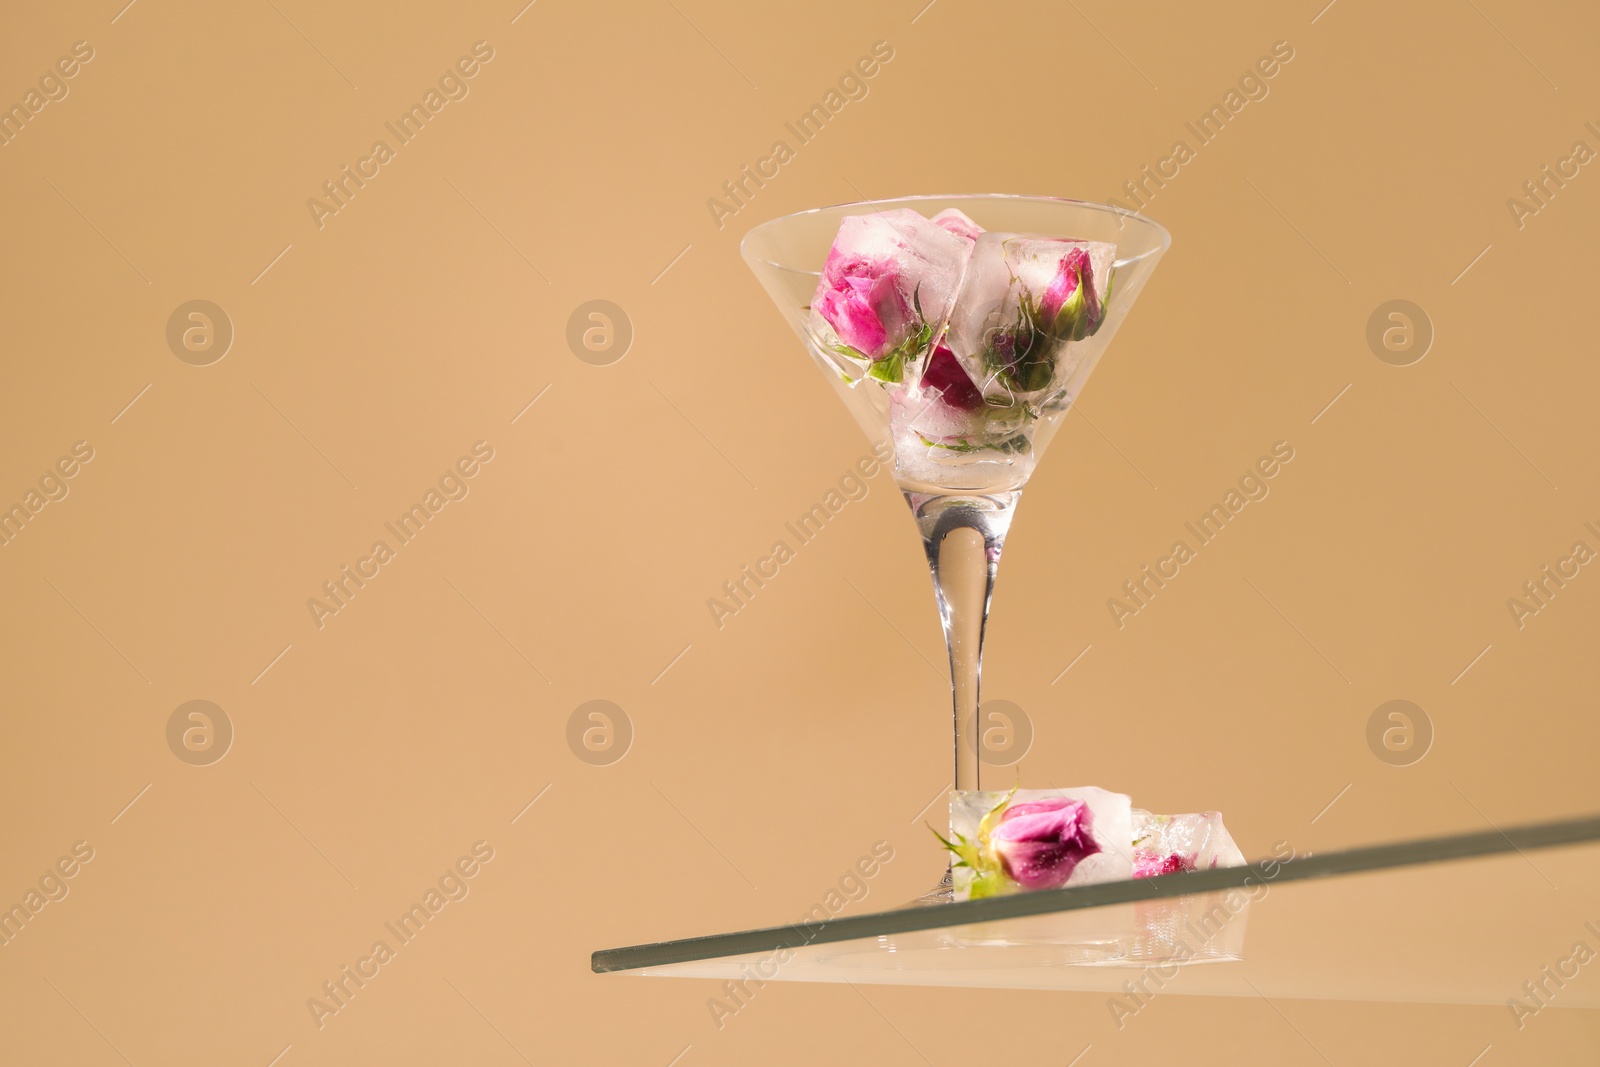 Photo of Ice cubes with frozen flowers in martini glass on table against beige background, low angle view. Space for text